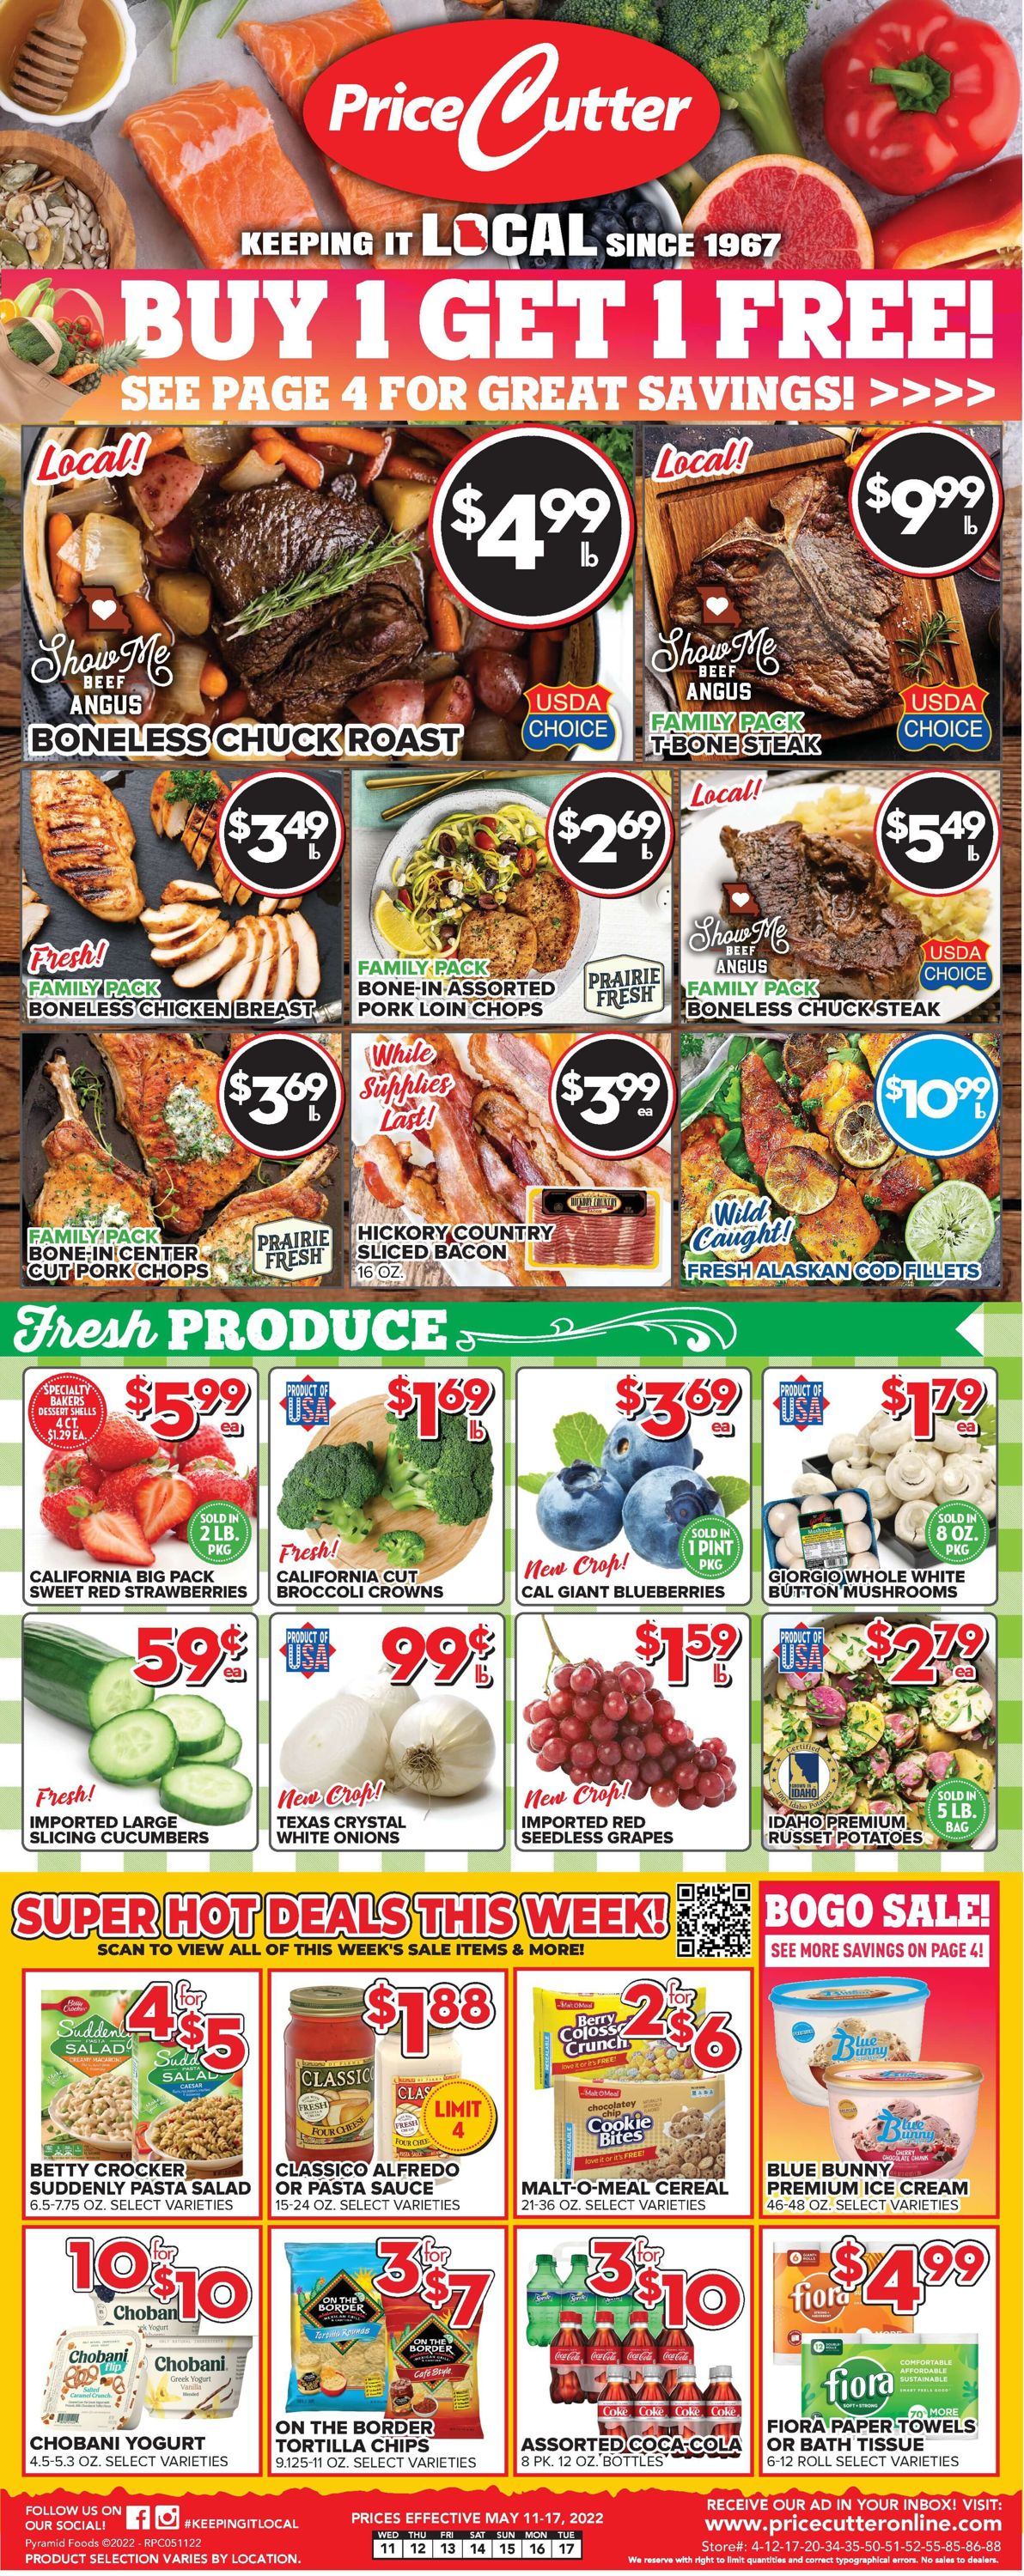 Price Cutter Weekly Ad Circular - valid 05/11-05/17/2022